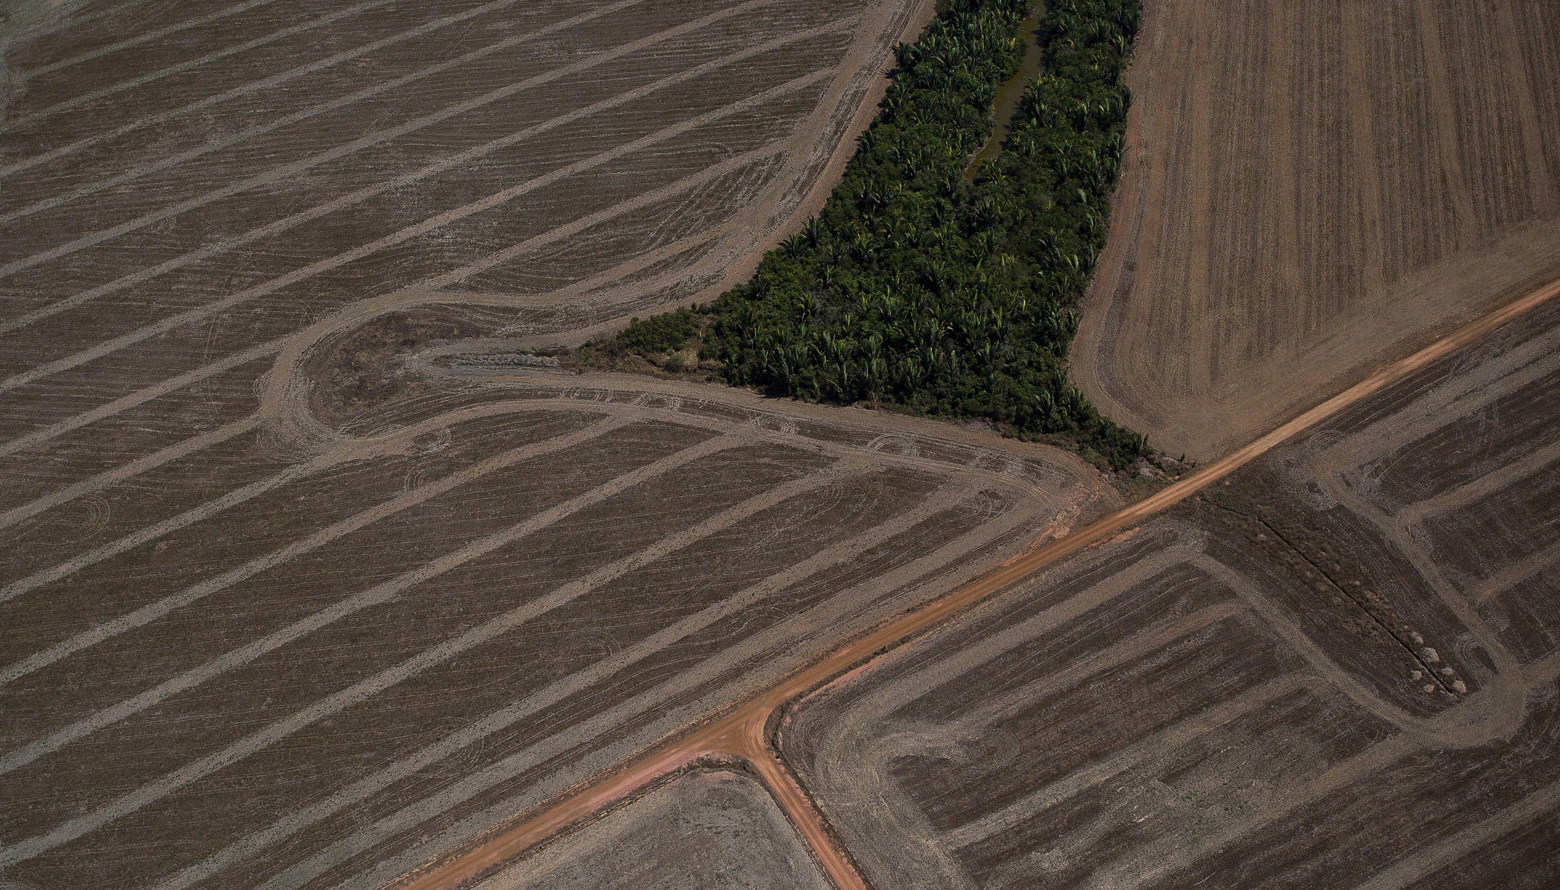 An aerial shot of a deforested area